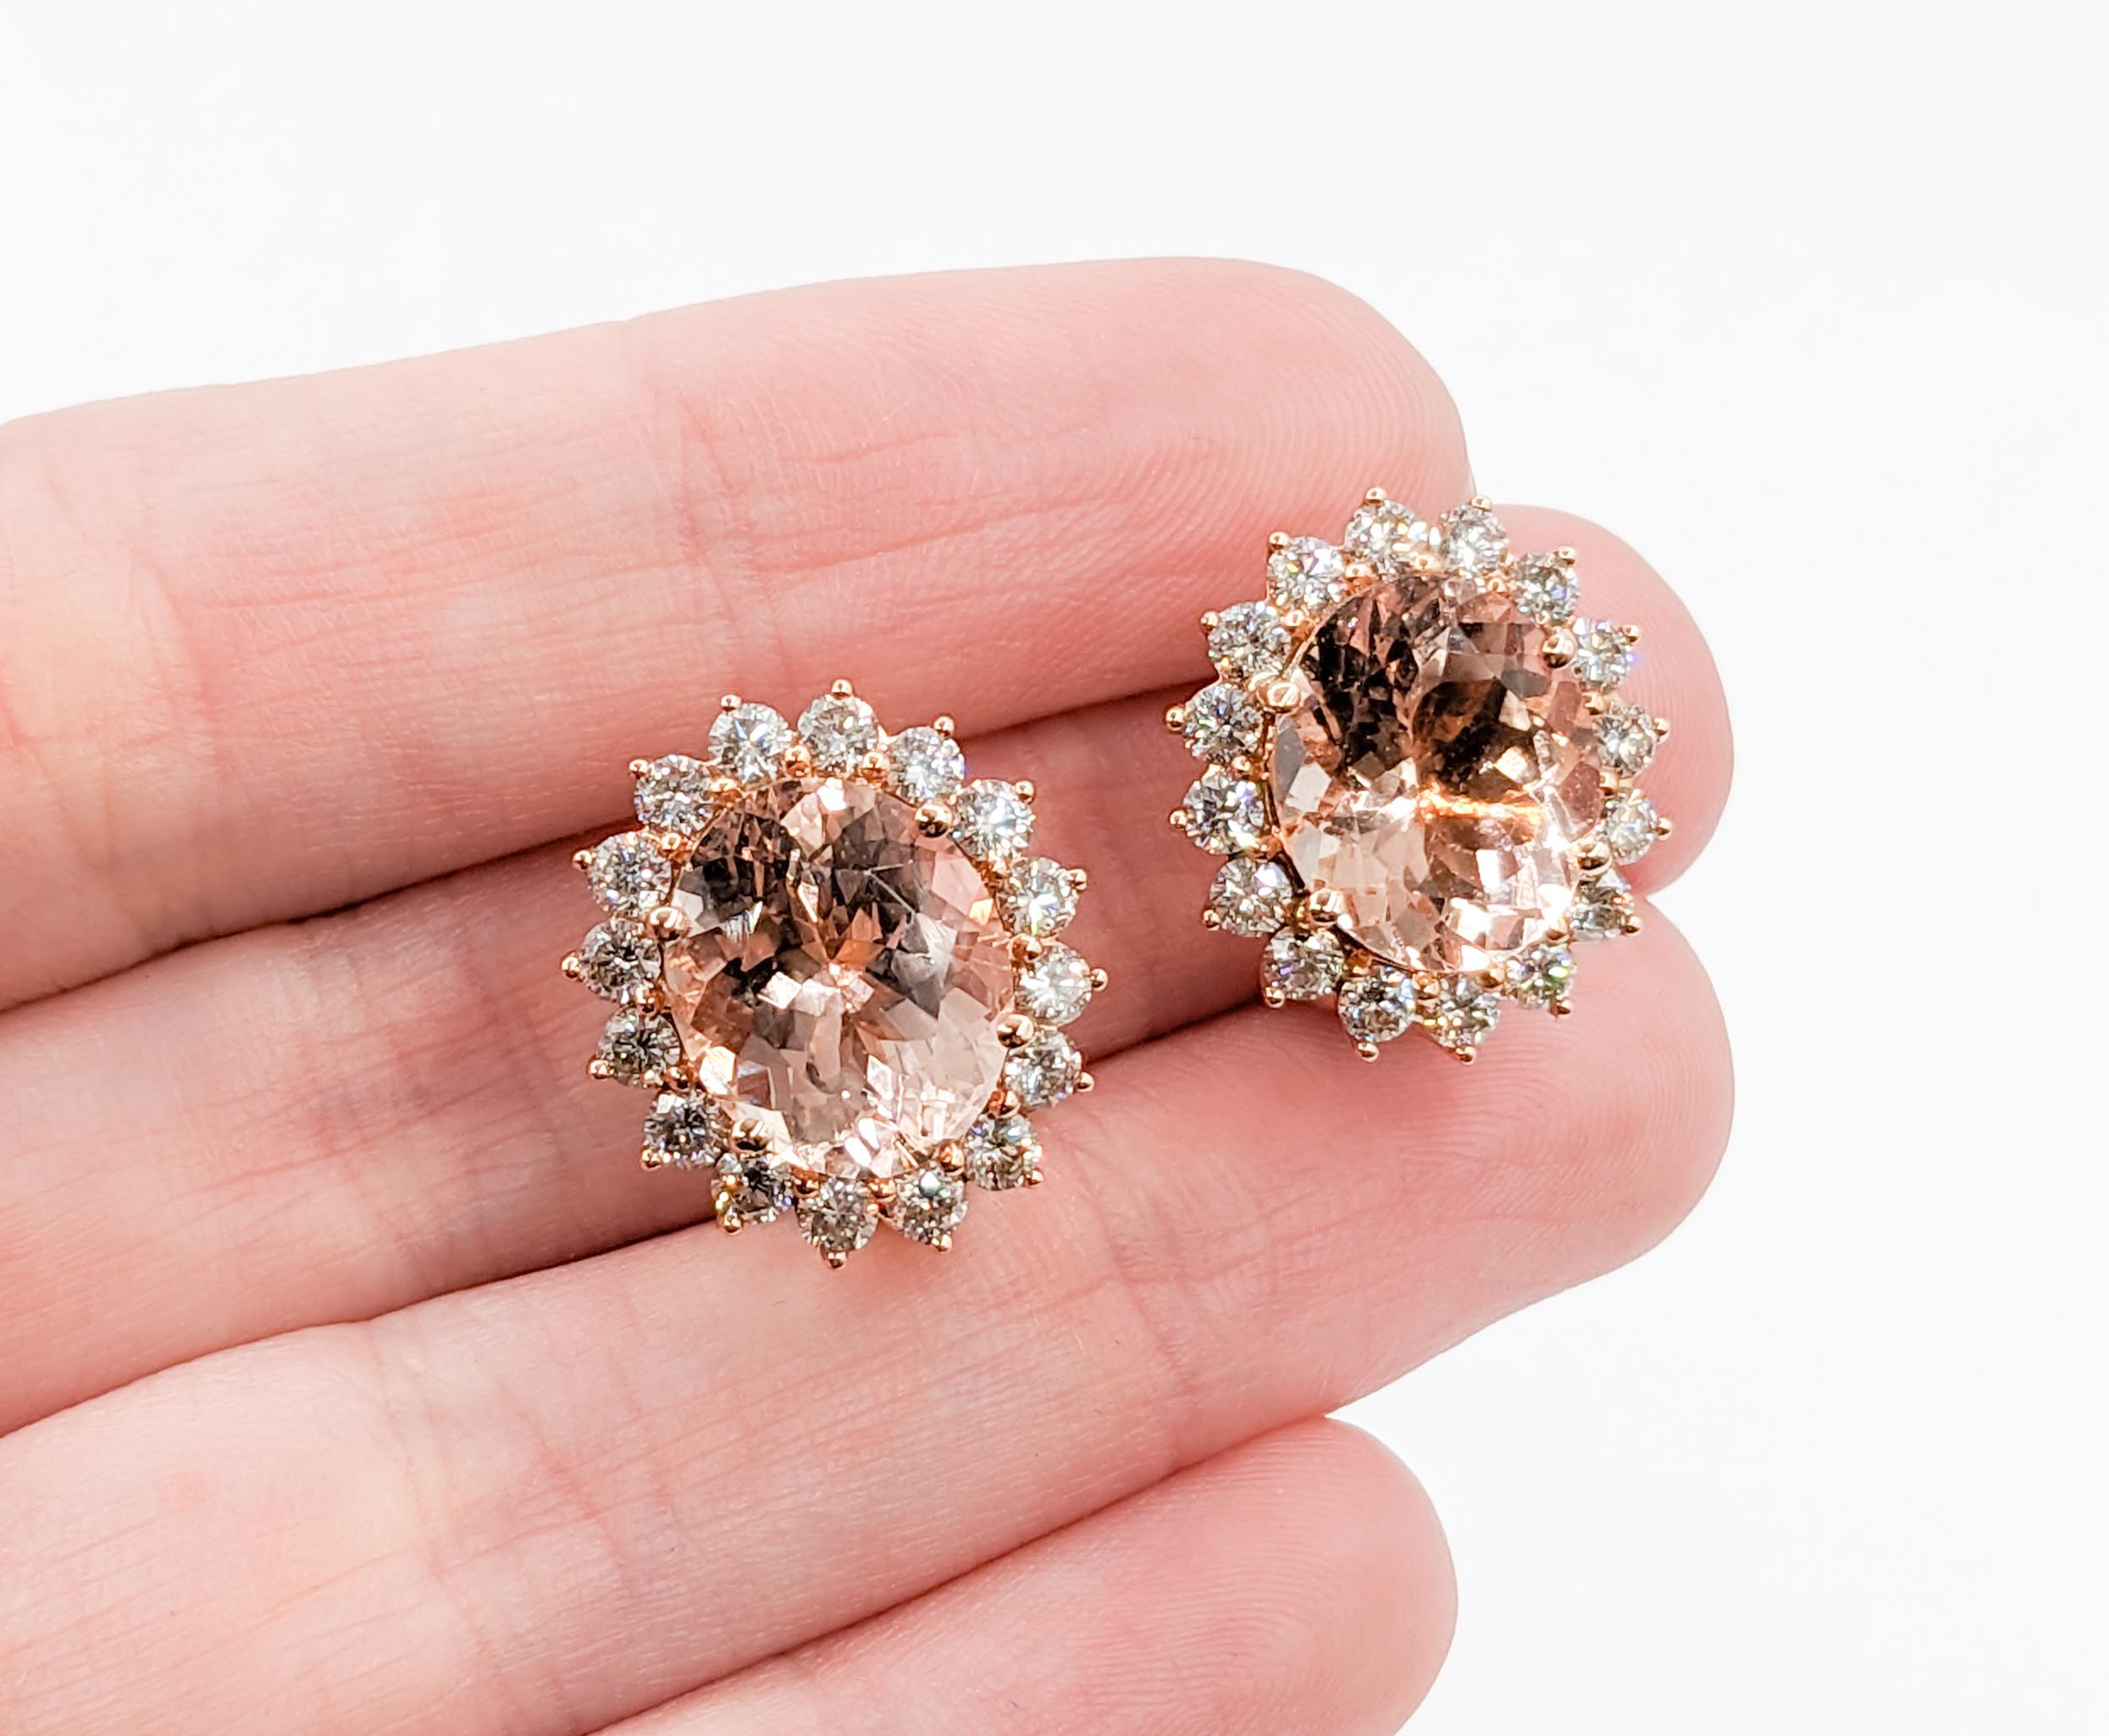 Fantastic Morganite & Brilliant Diamond Halo Omega Earrings

Experience the sheer elegance of these finely crafted earrings, featuring a stunning composition of 14k rose gold. The centerpiece showcases an exquisite 8.82ctw oval-cut morganite,